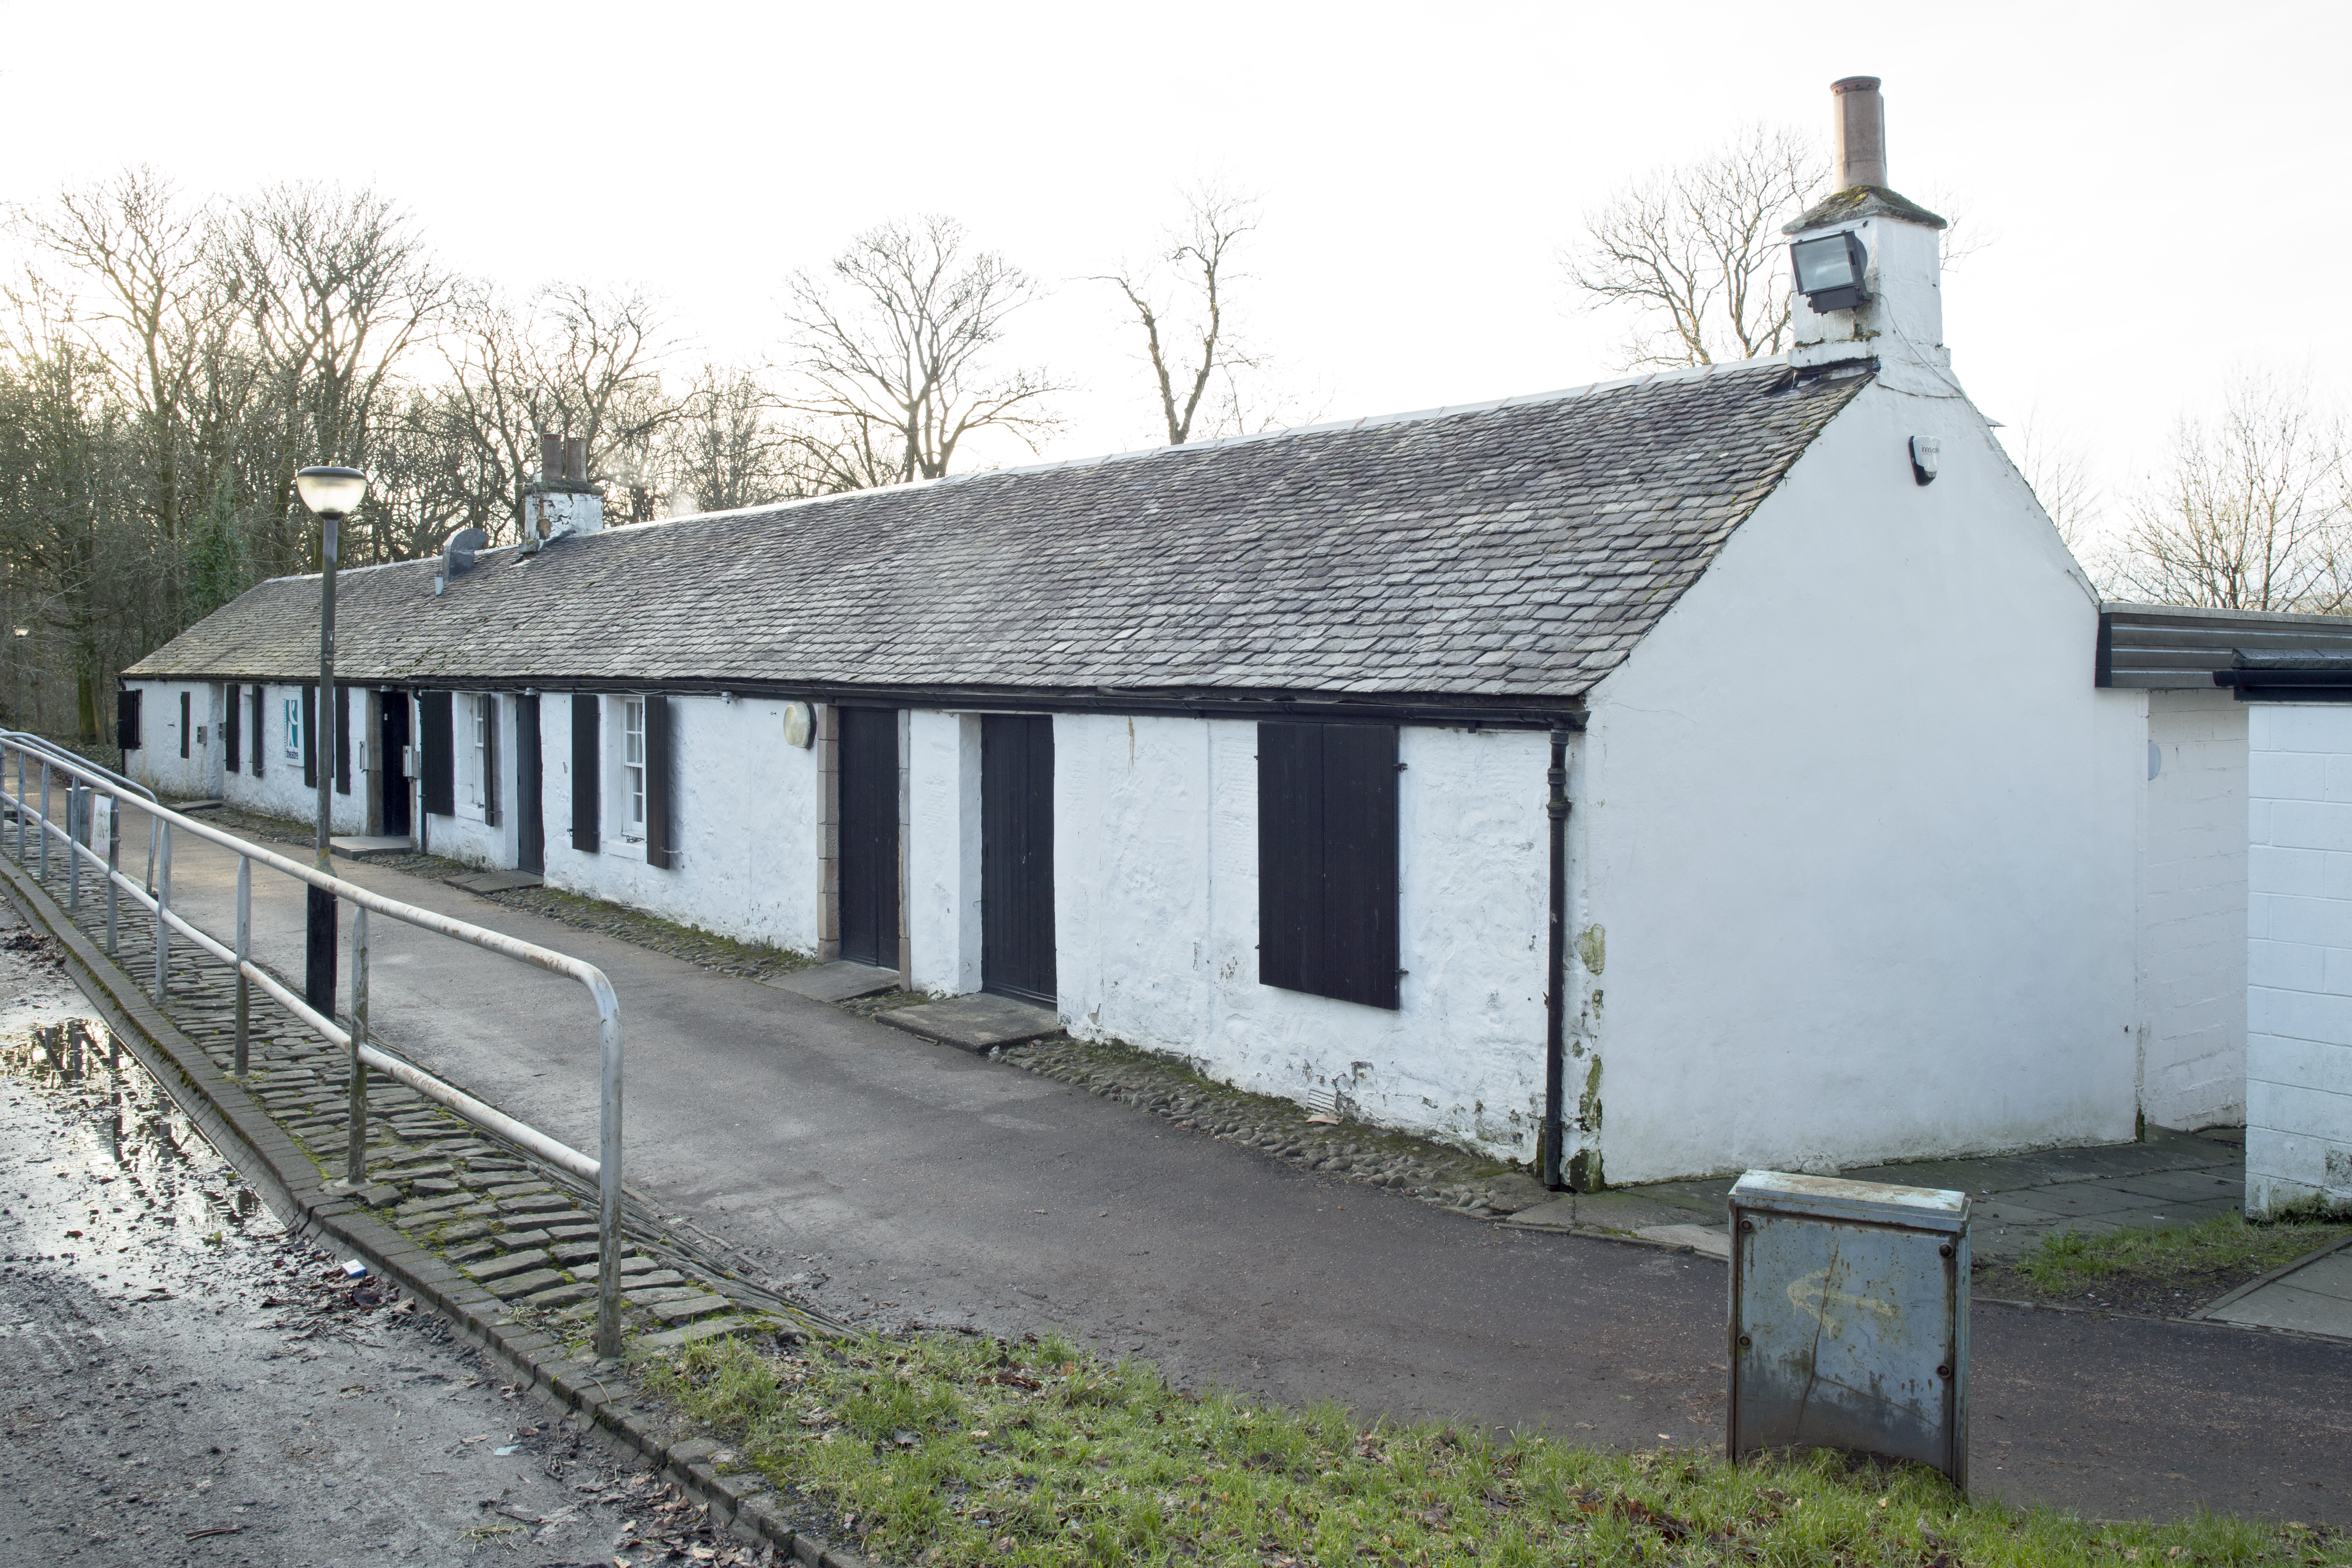 White row of cottages, grey roof, black boarded doors and shutters, white sky with trees